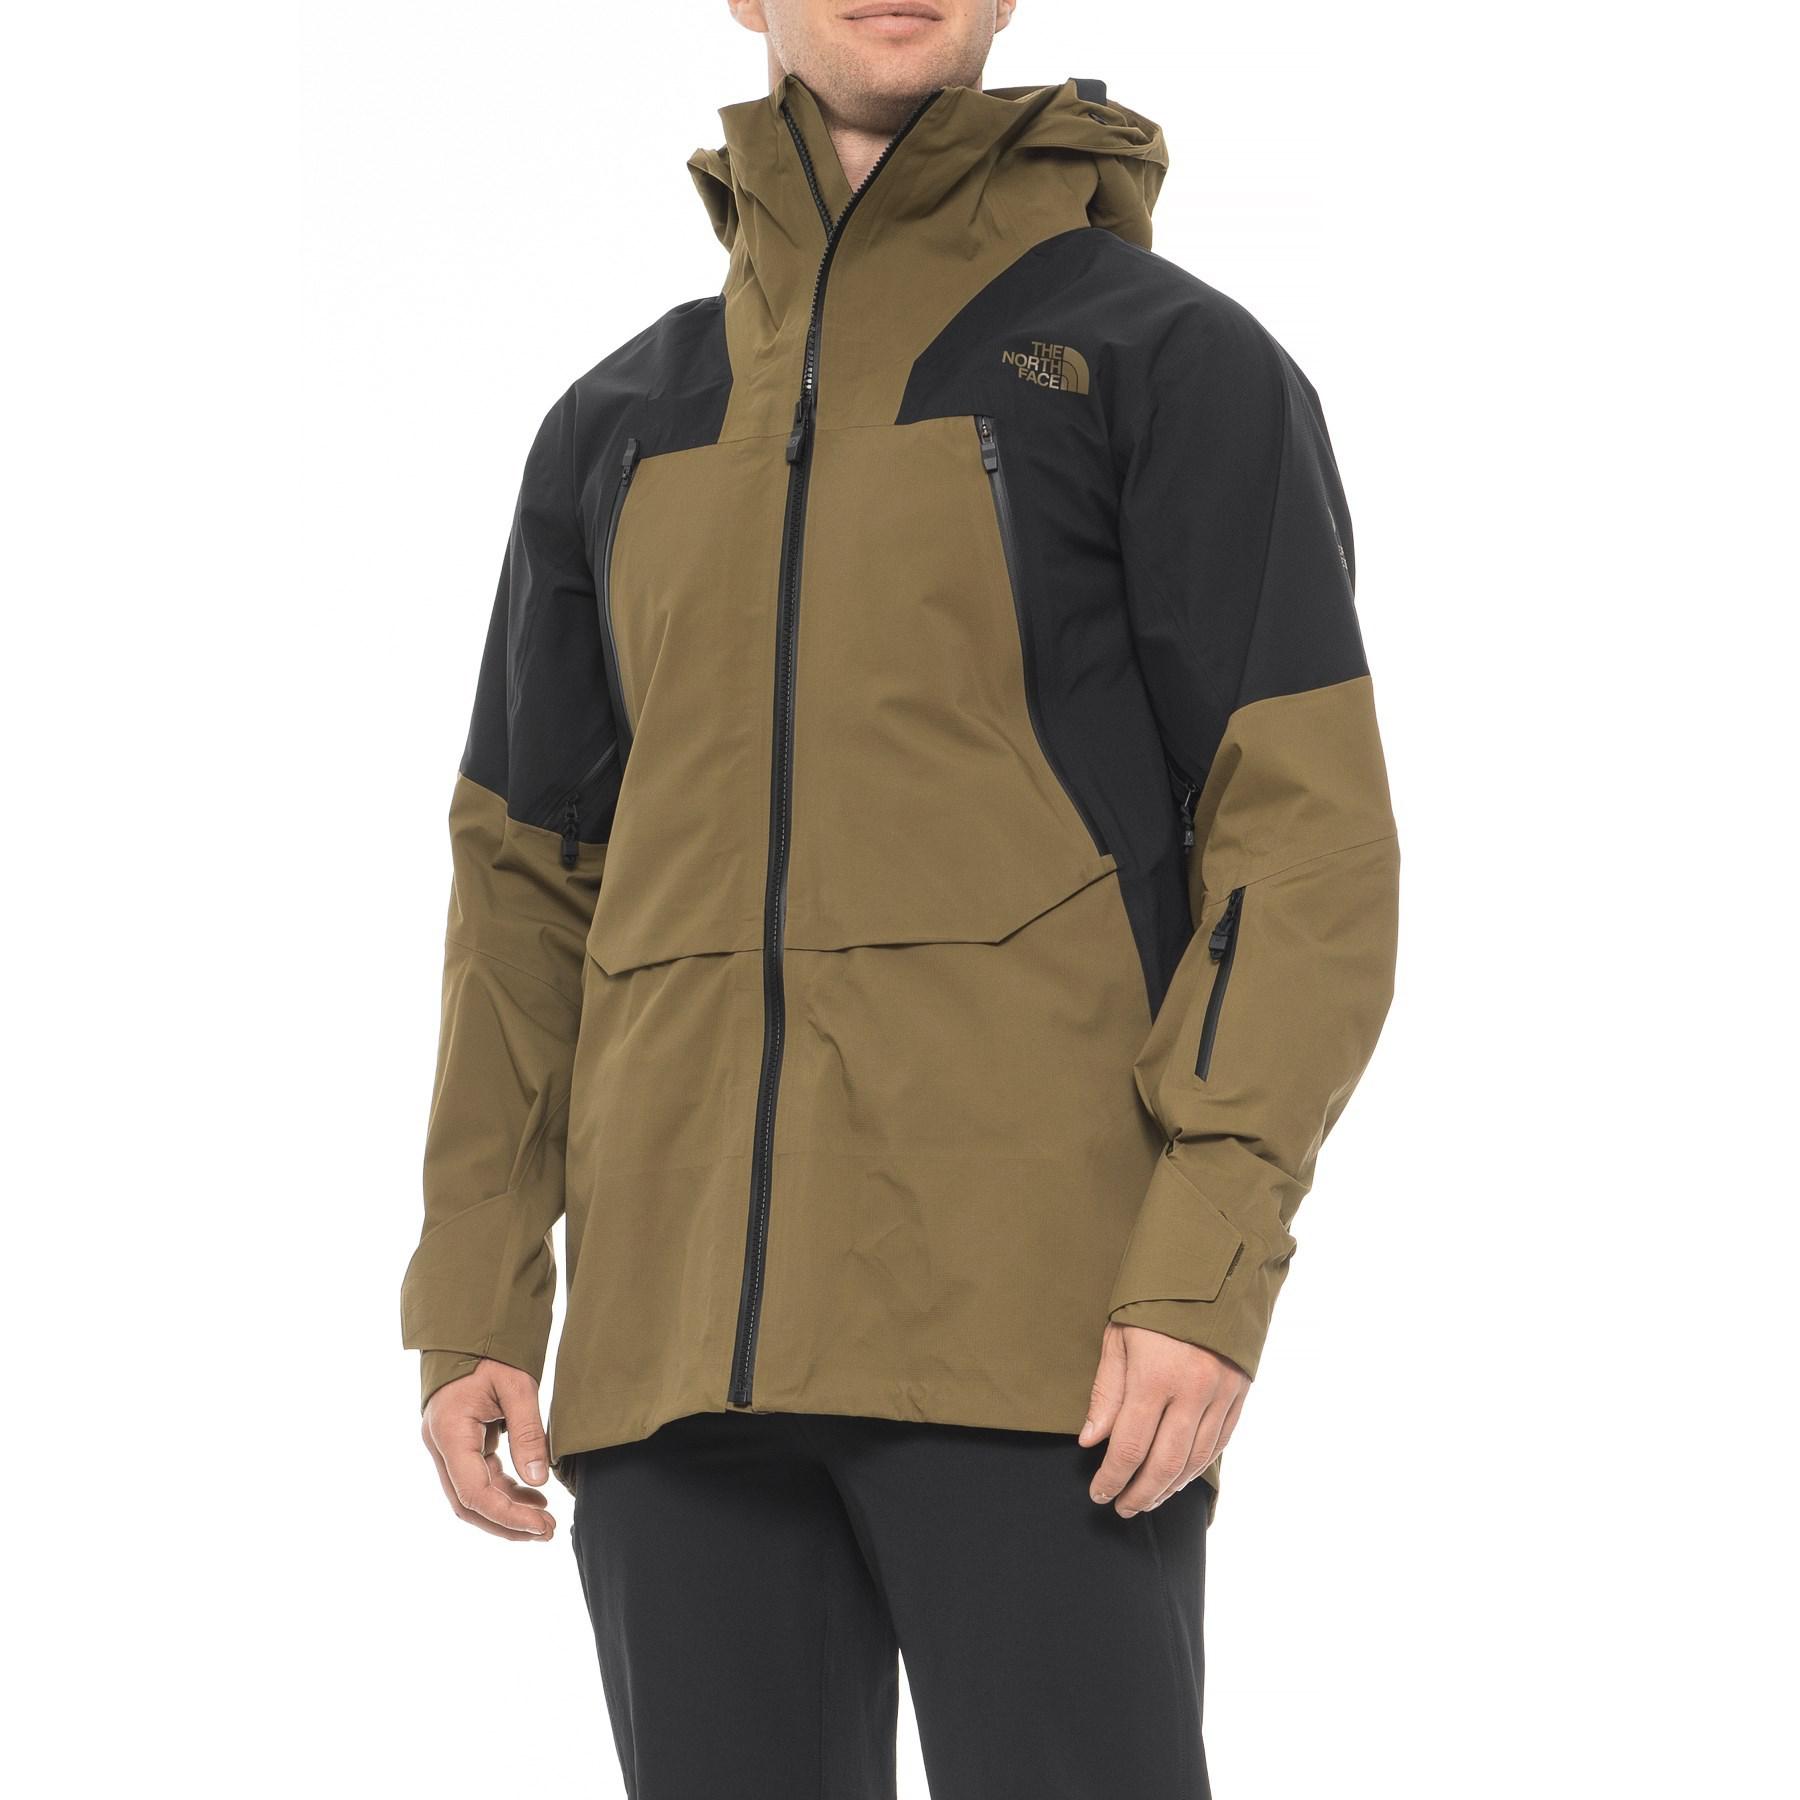 purist triclimate jacket